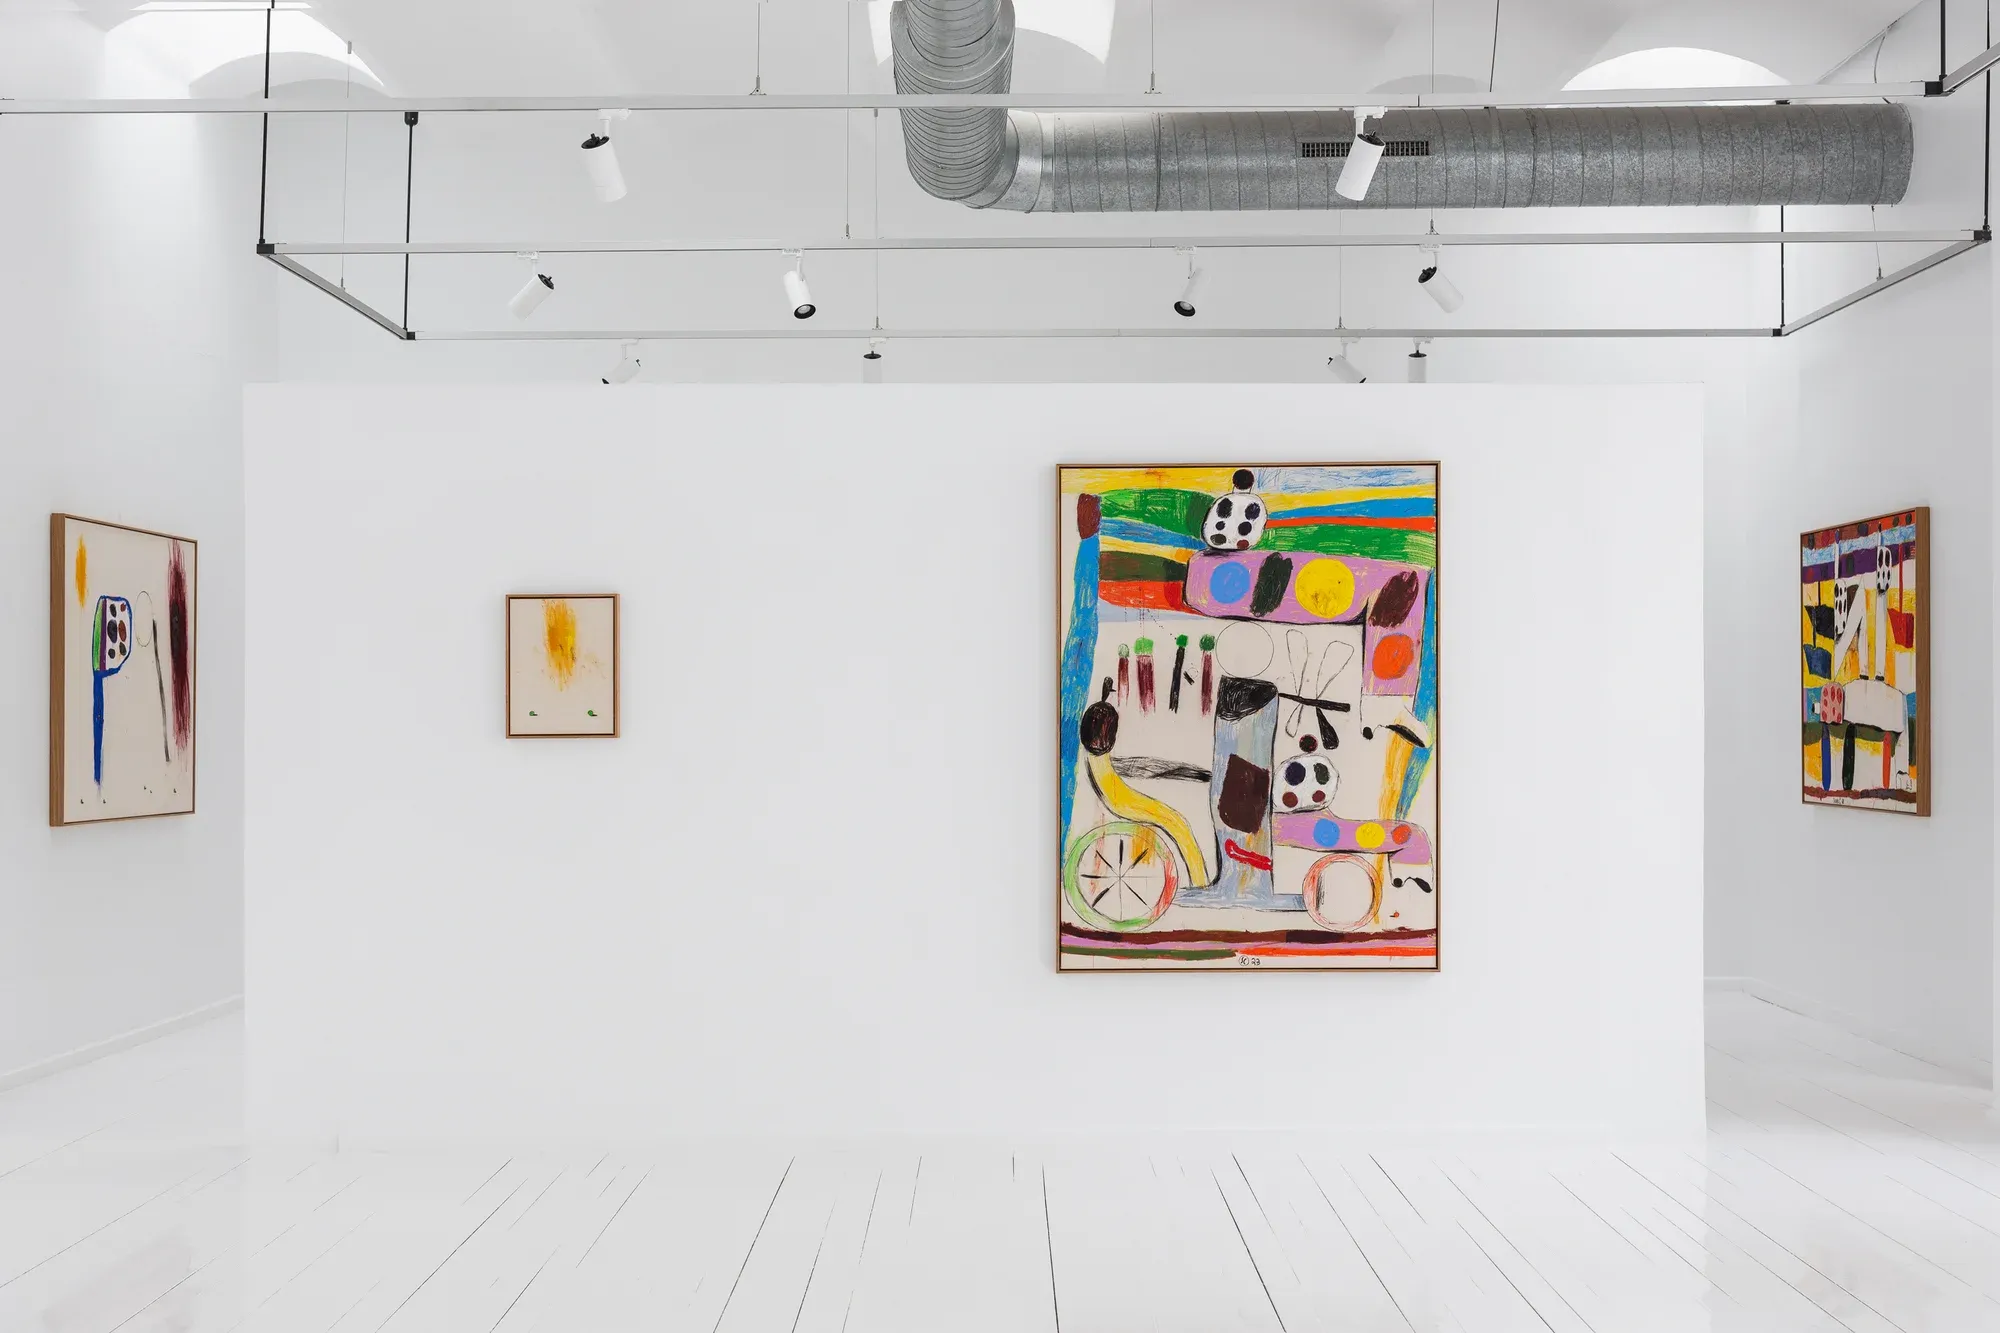 the leftovers by sune christiansen at alzueta gallery, barcelona, featuring vibrant abstract art and highlighting new faces in contemporary art